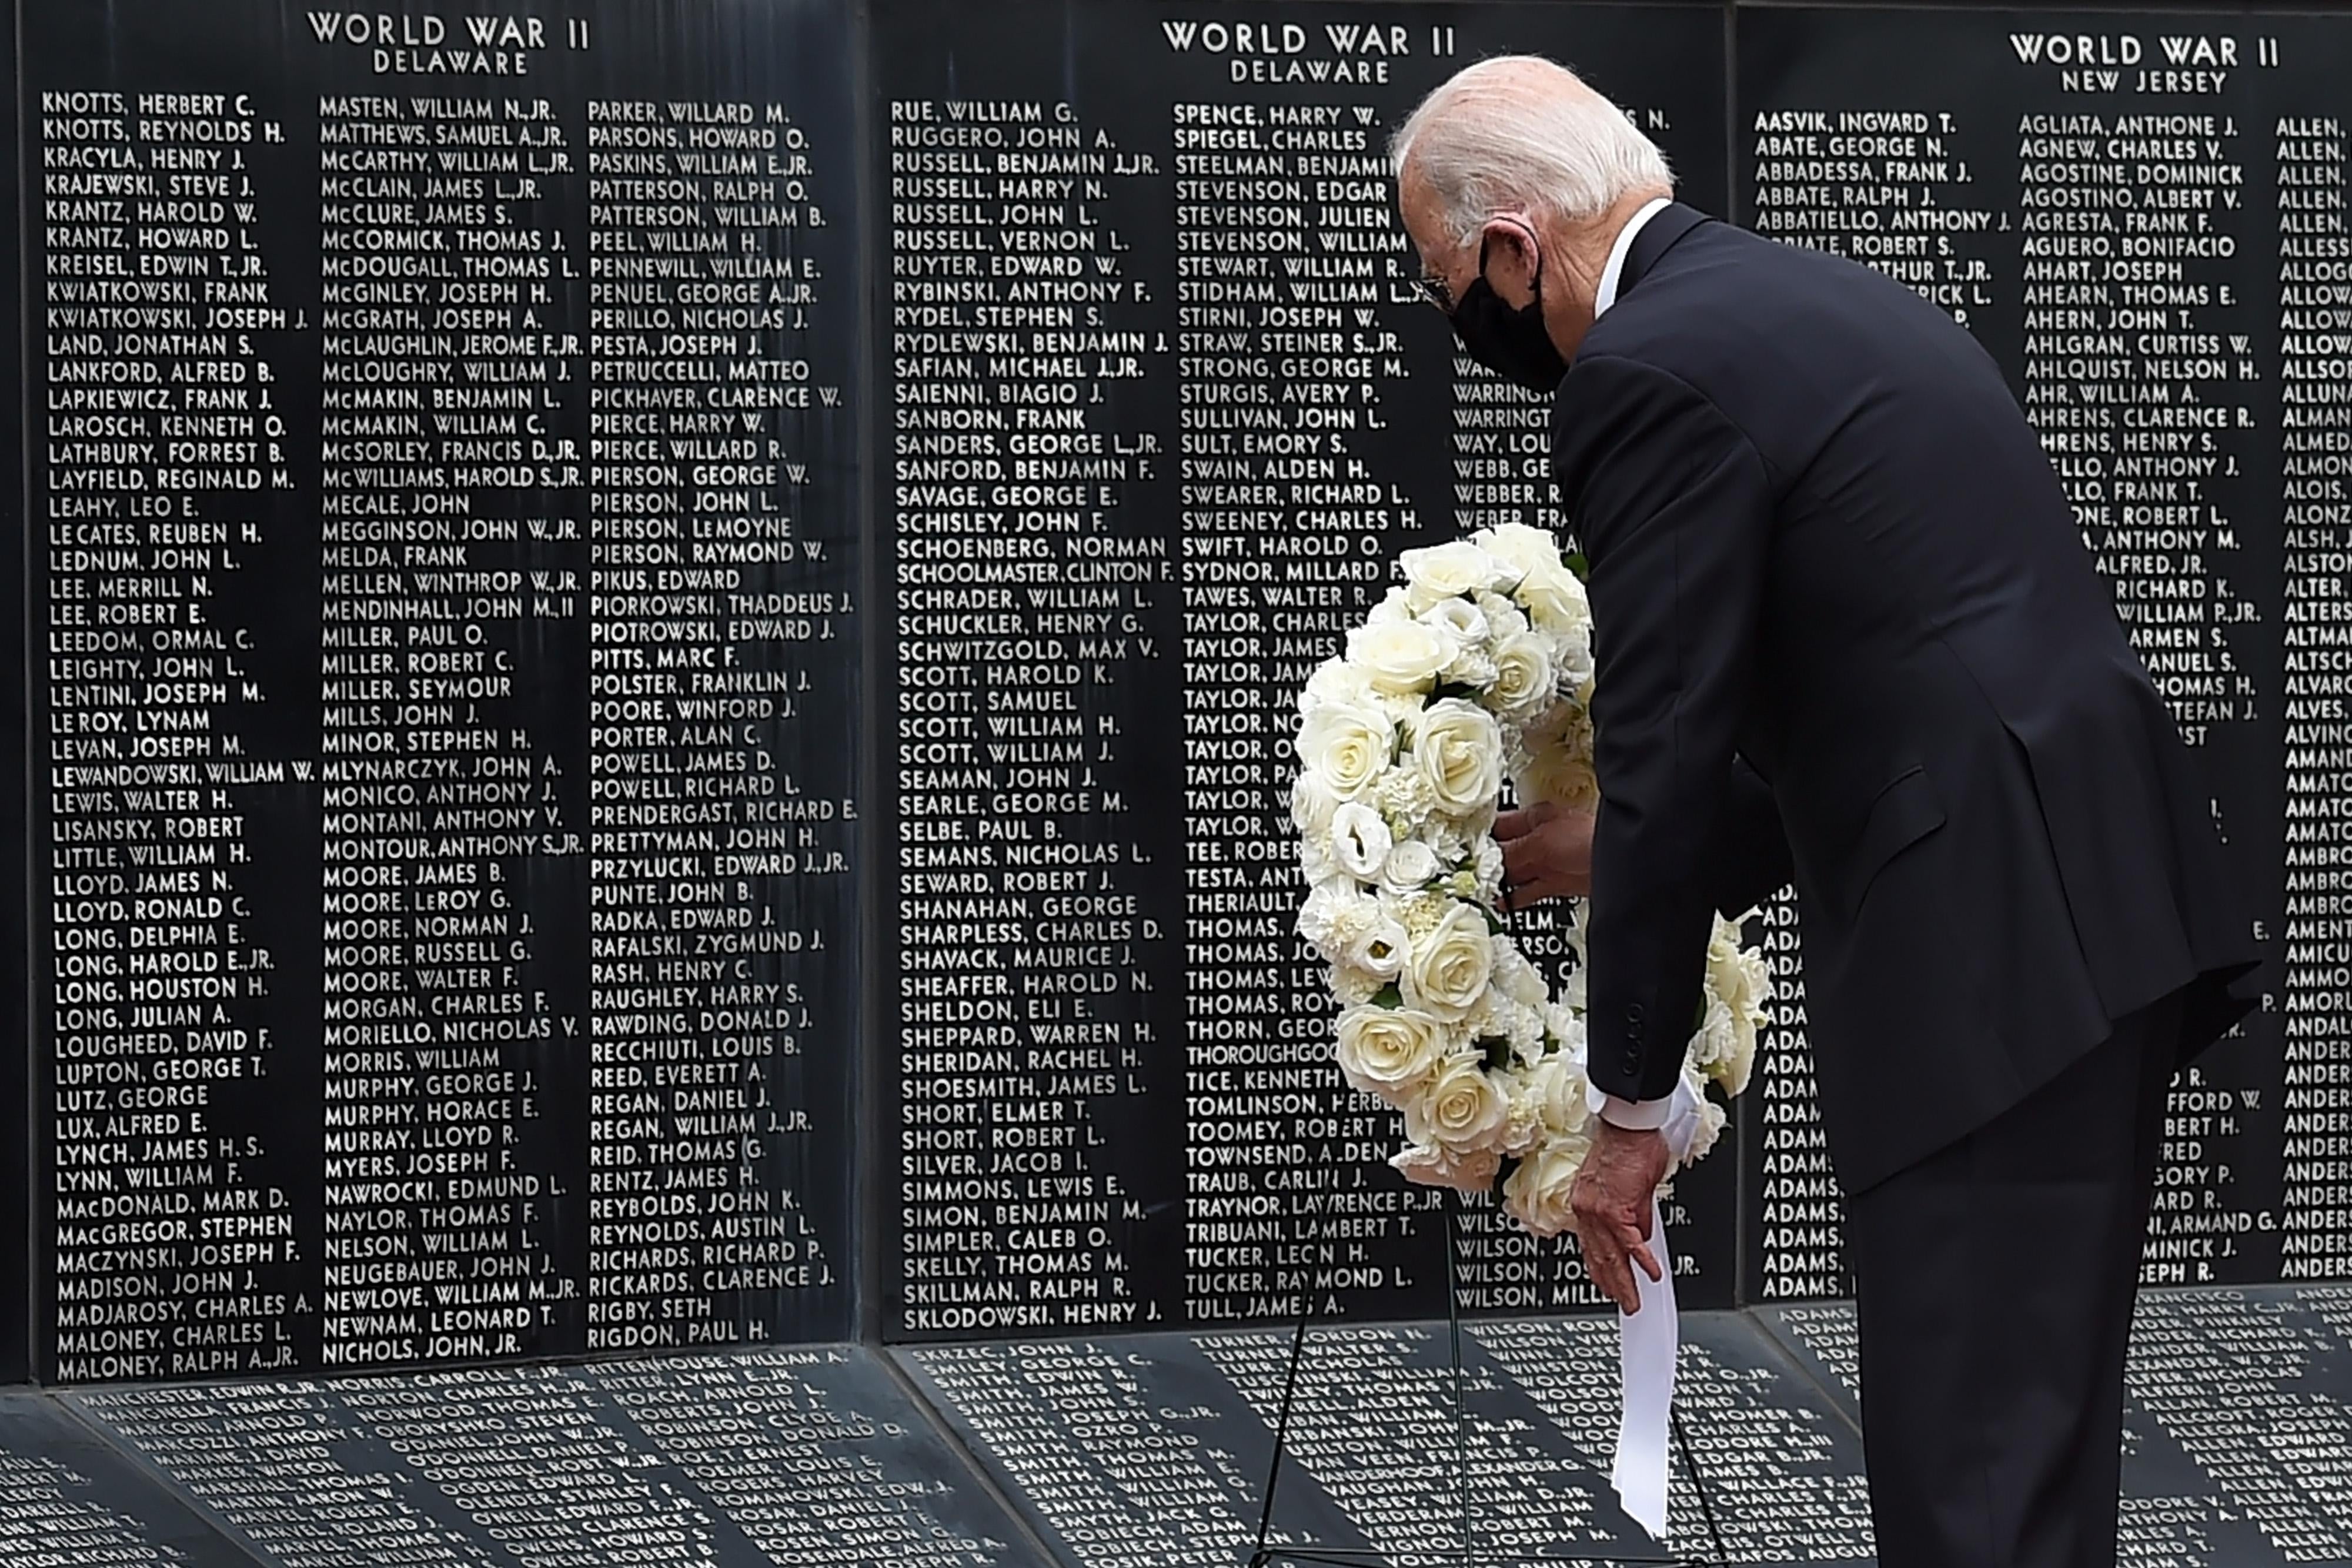 Democratic presidential candidate Joe Biden, wearing a black mask, lays a wreath to pay his respects to fallen service members on Memorial Day.